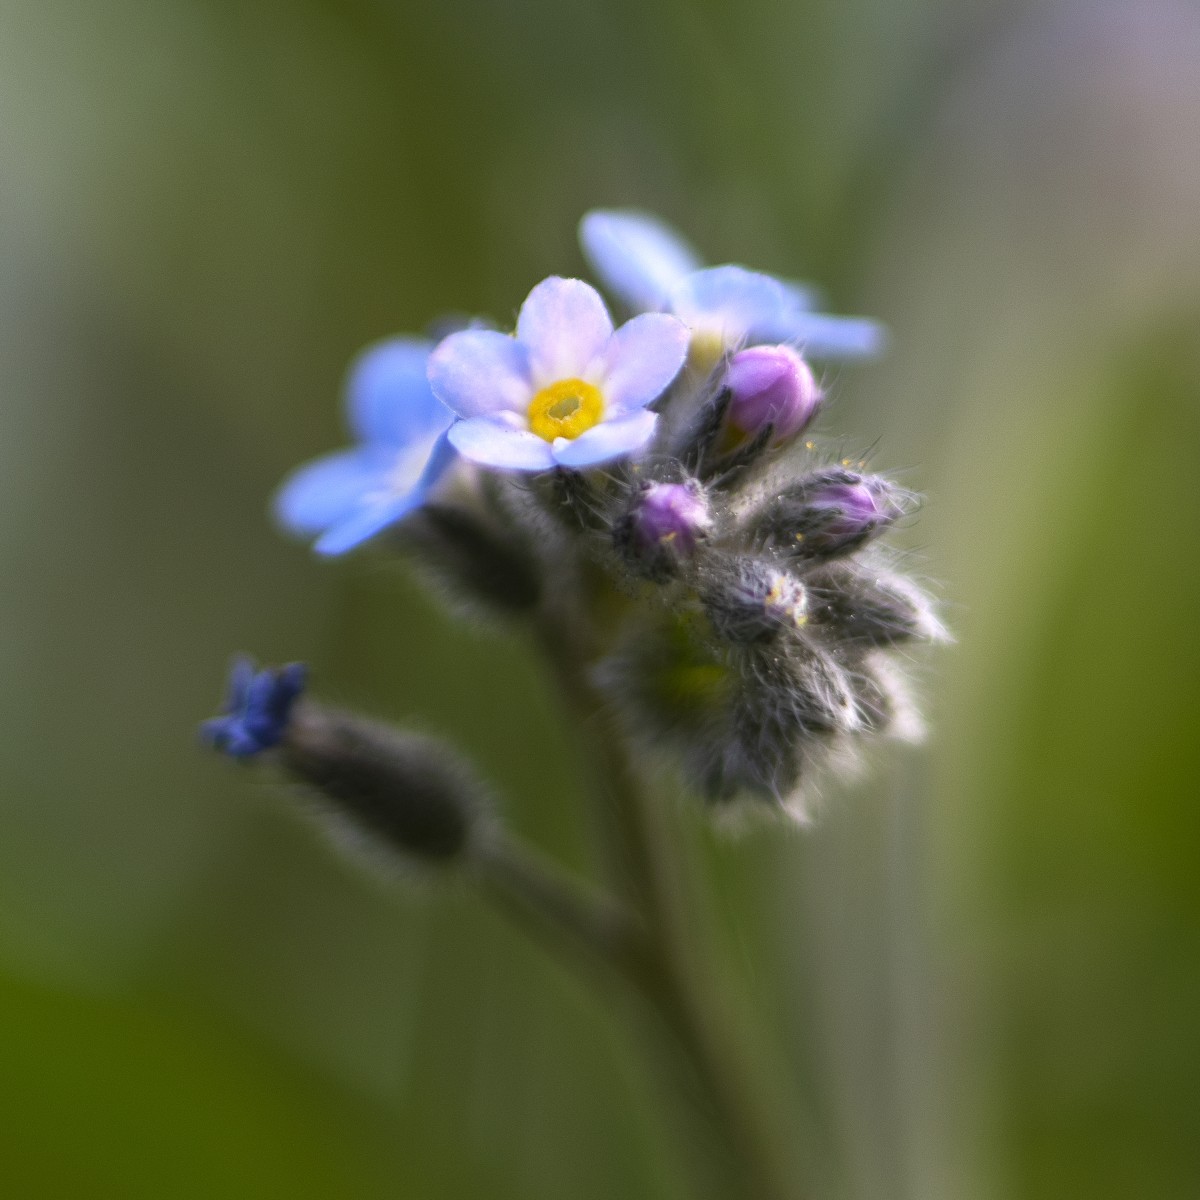 Forget me not flower and emerging pink buds